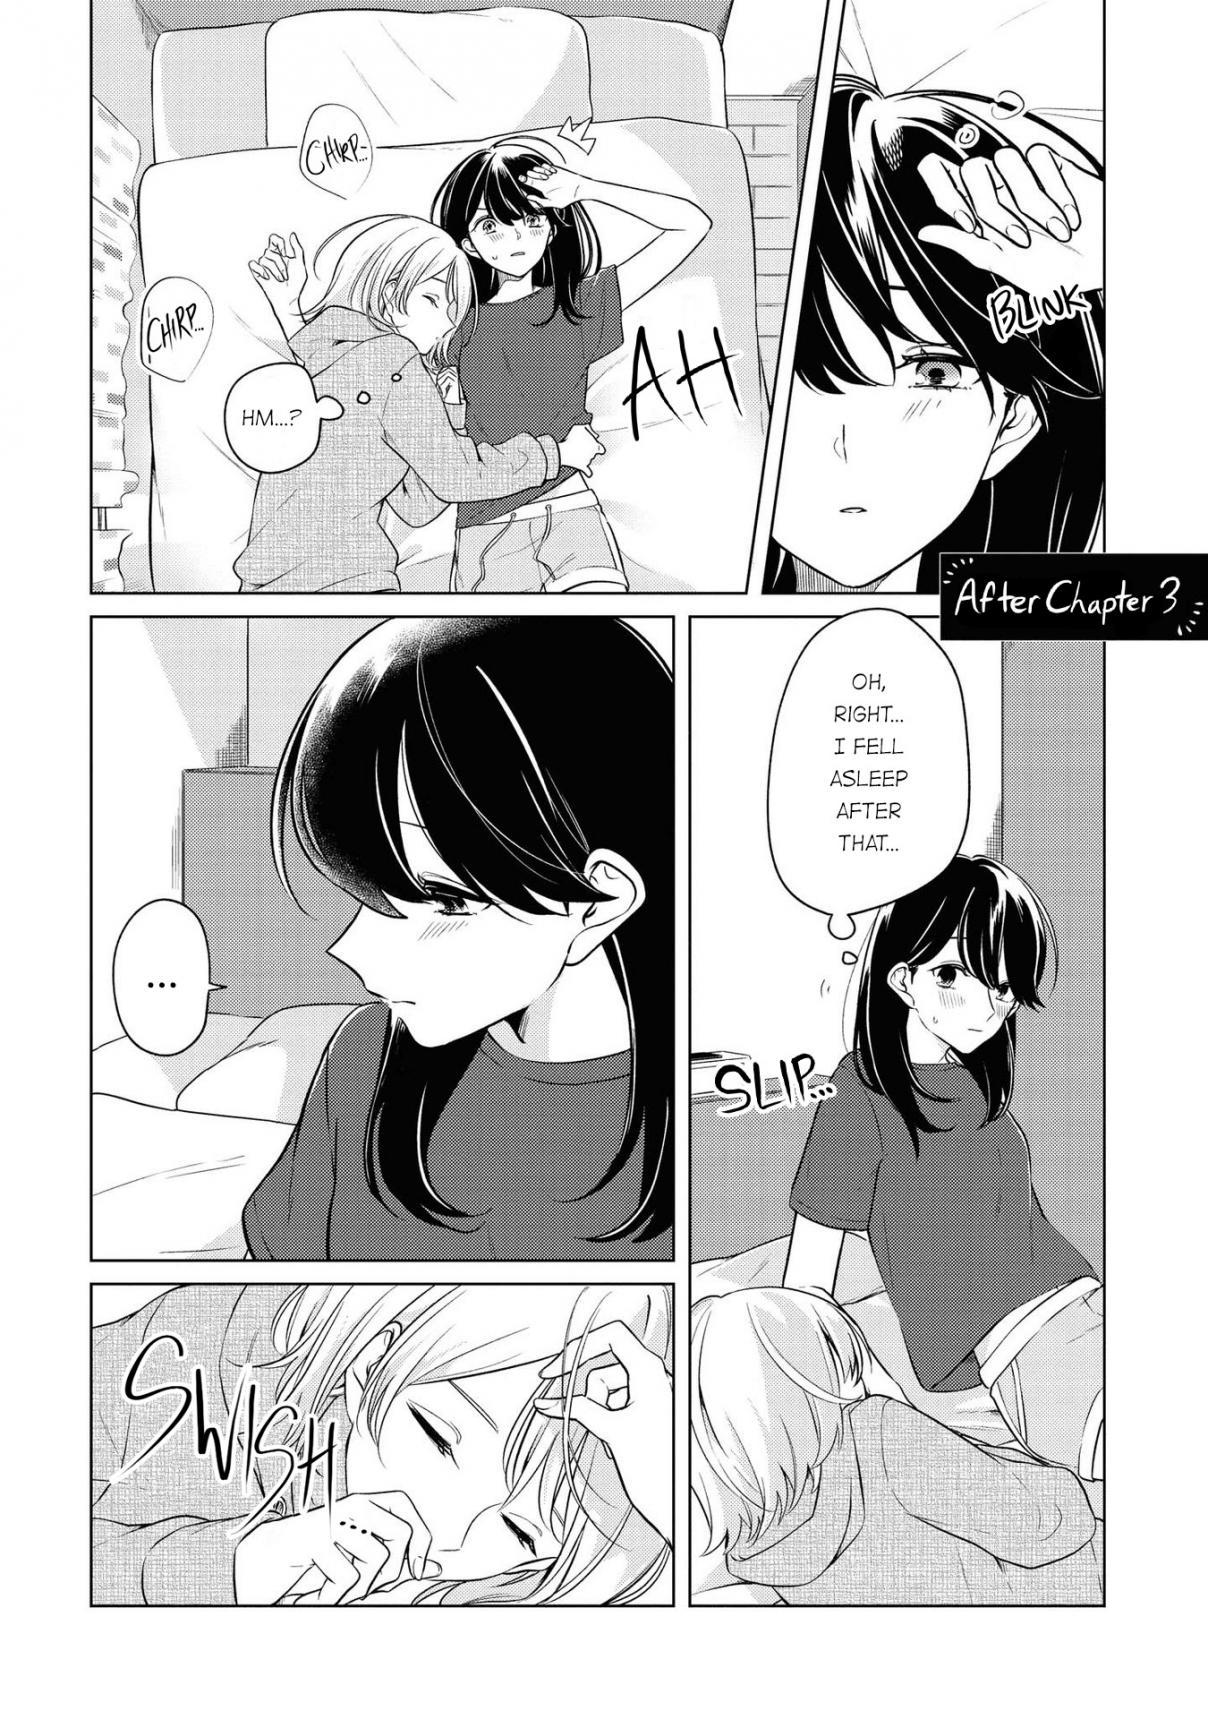 Can't Defy the Lonely Girl Vol. 1 Ch. 5.1 Volume 1 Extras